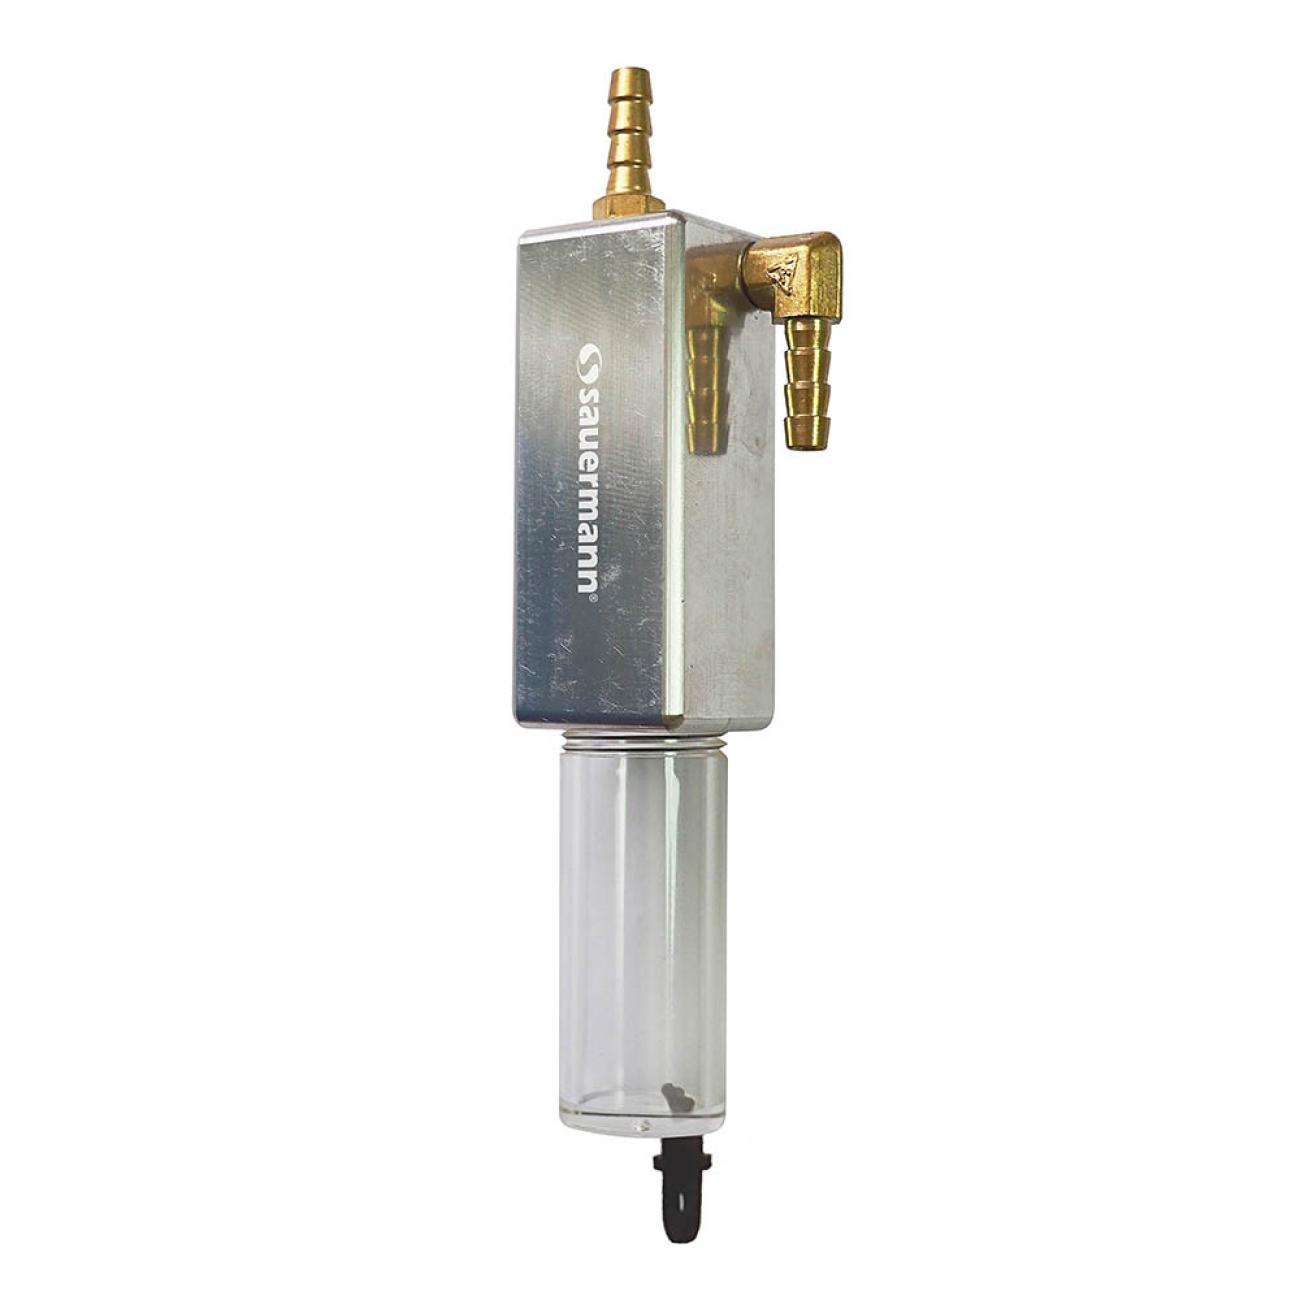 Sample conditioning unit Ideal for Low NO2 & Low SO2 Measurements